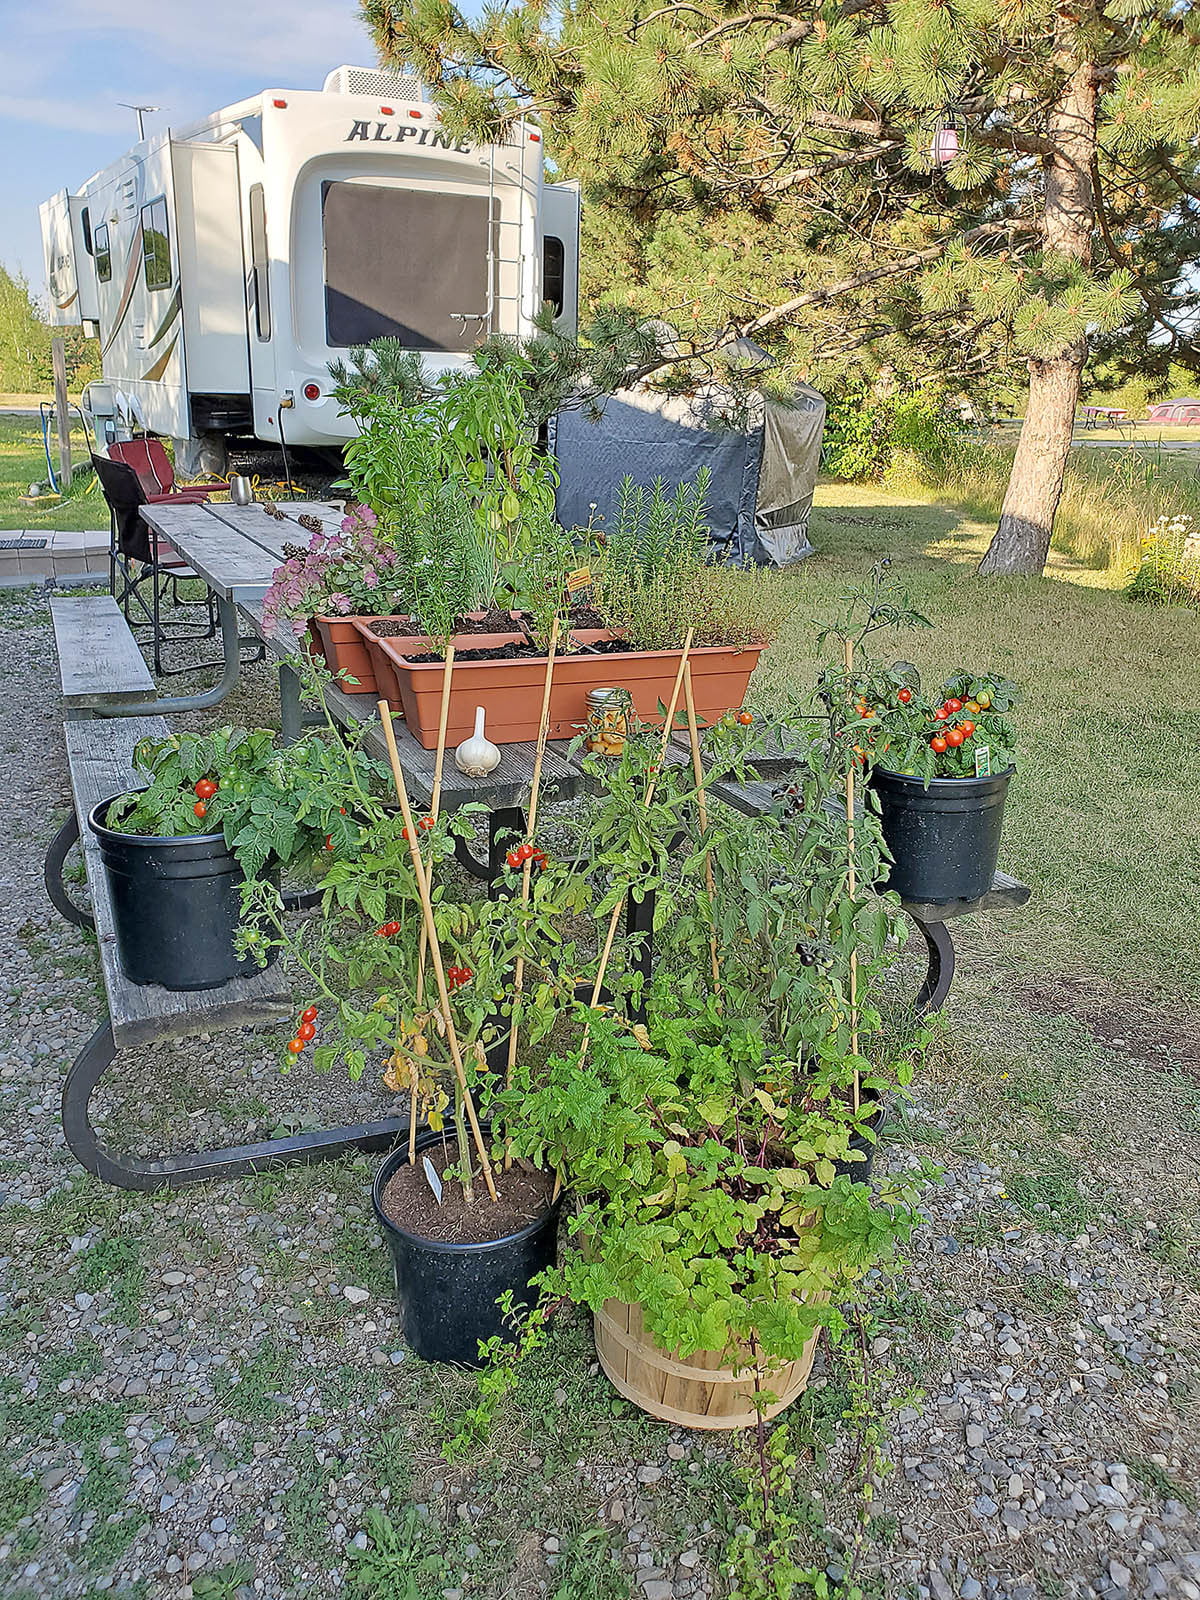 A vegetable garden with tomatoes, mint, garlic, and basil grows in planters beside a picnic table at a campground. Behind the vegetable garden is a camper trailer. 